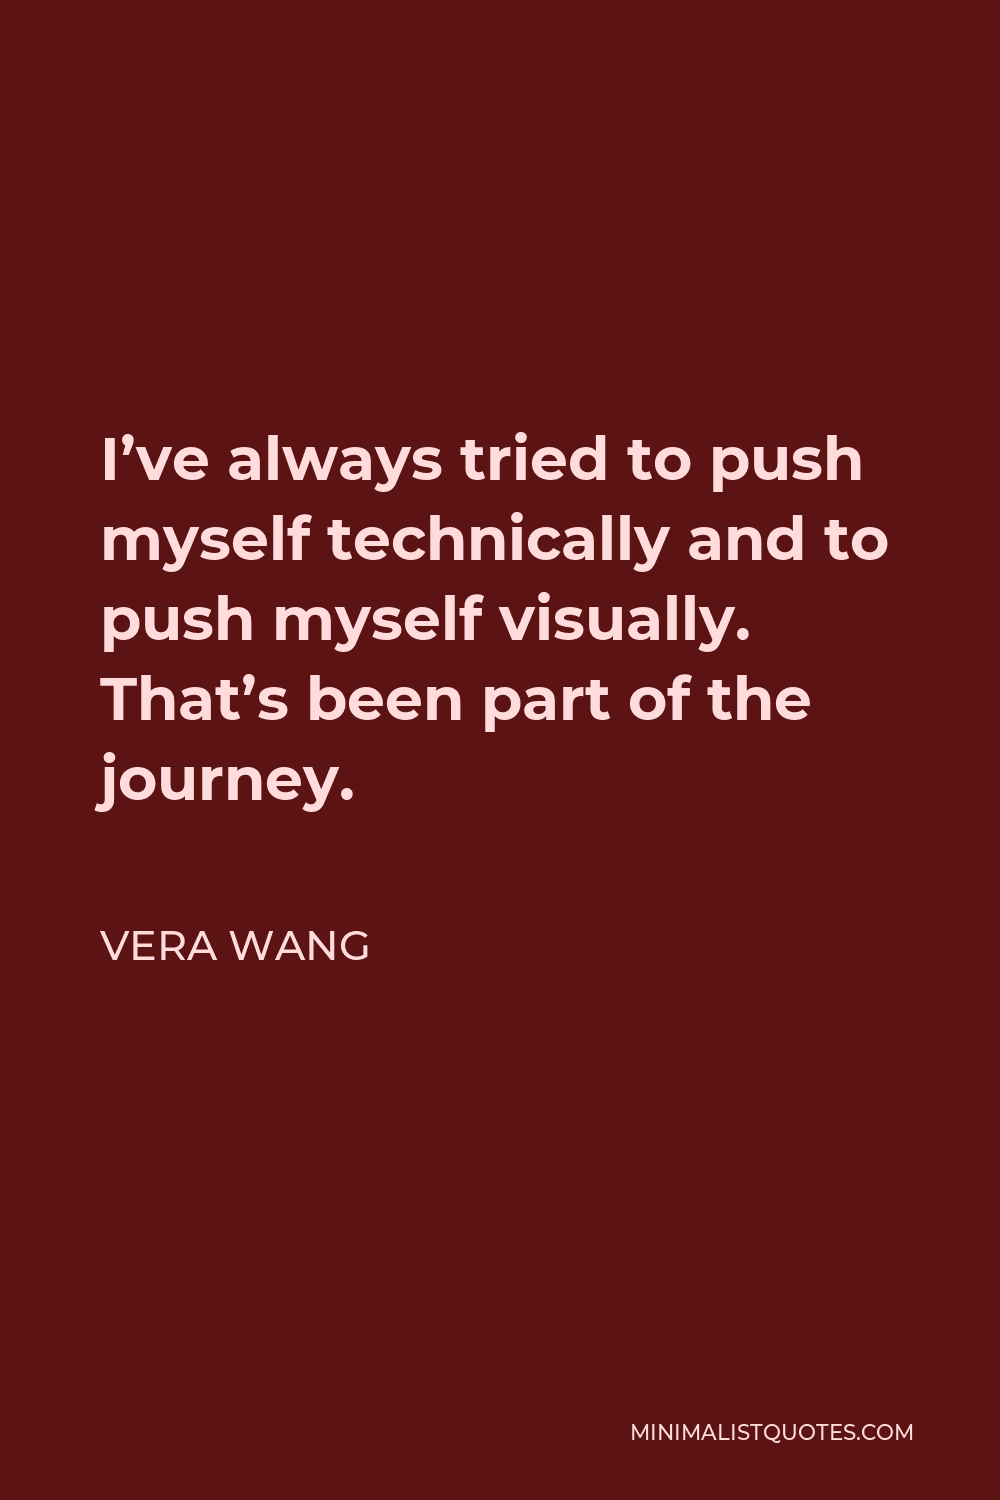 Vera Wang Quote - I’ve always tried to push myself technically and to push myself visually. That’s been part of the journey.